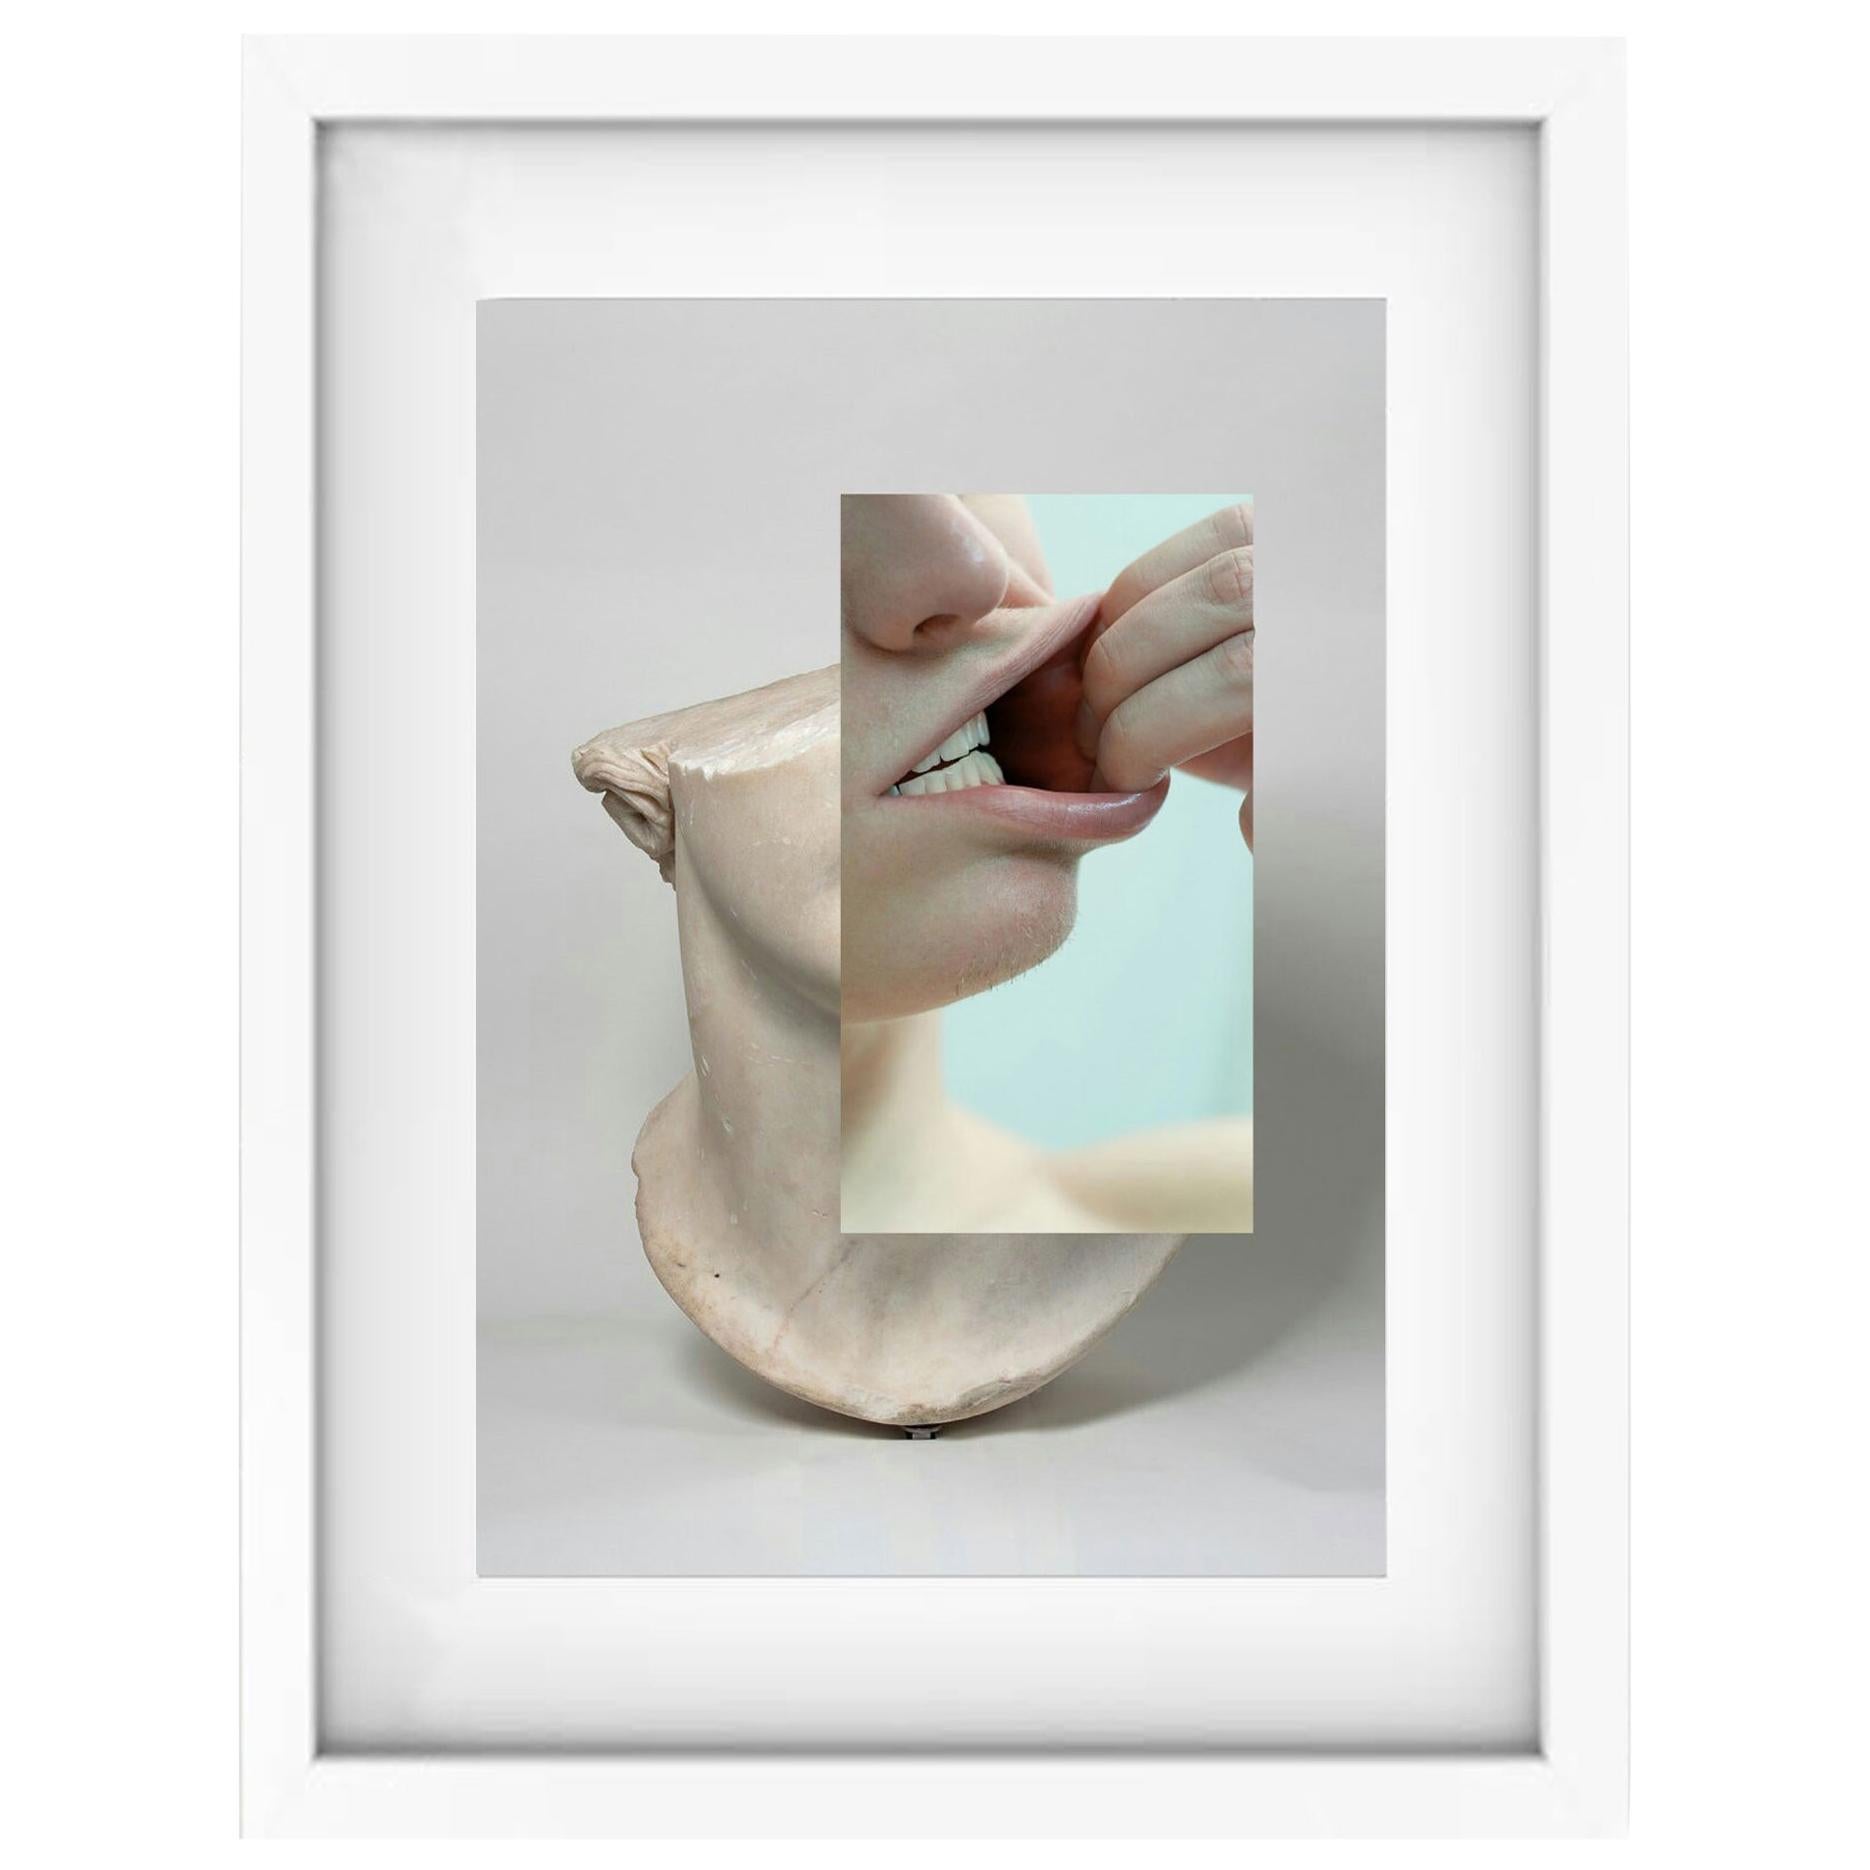 Classic Sculpture Mouth Naro Pinosa, "Untitled" Digital Collage, Spain, 2019 For Sale